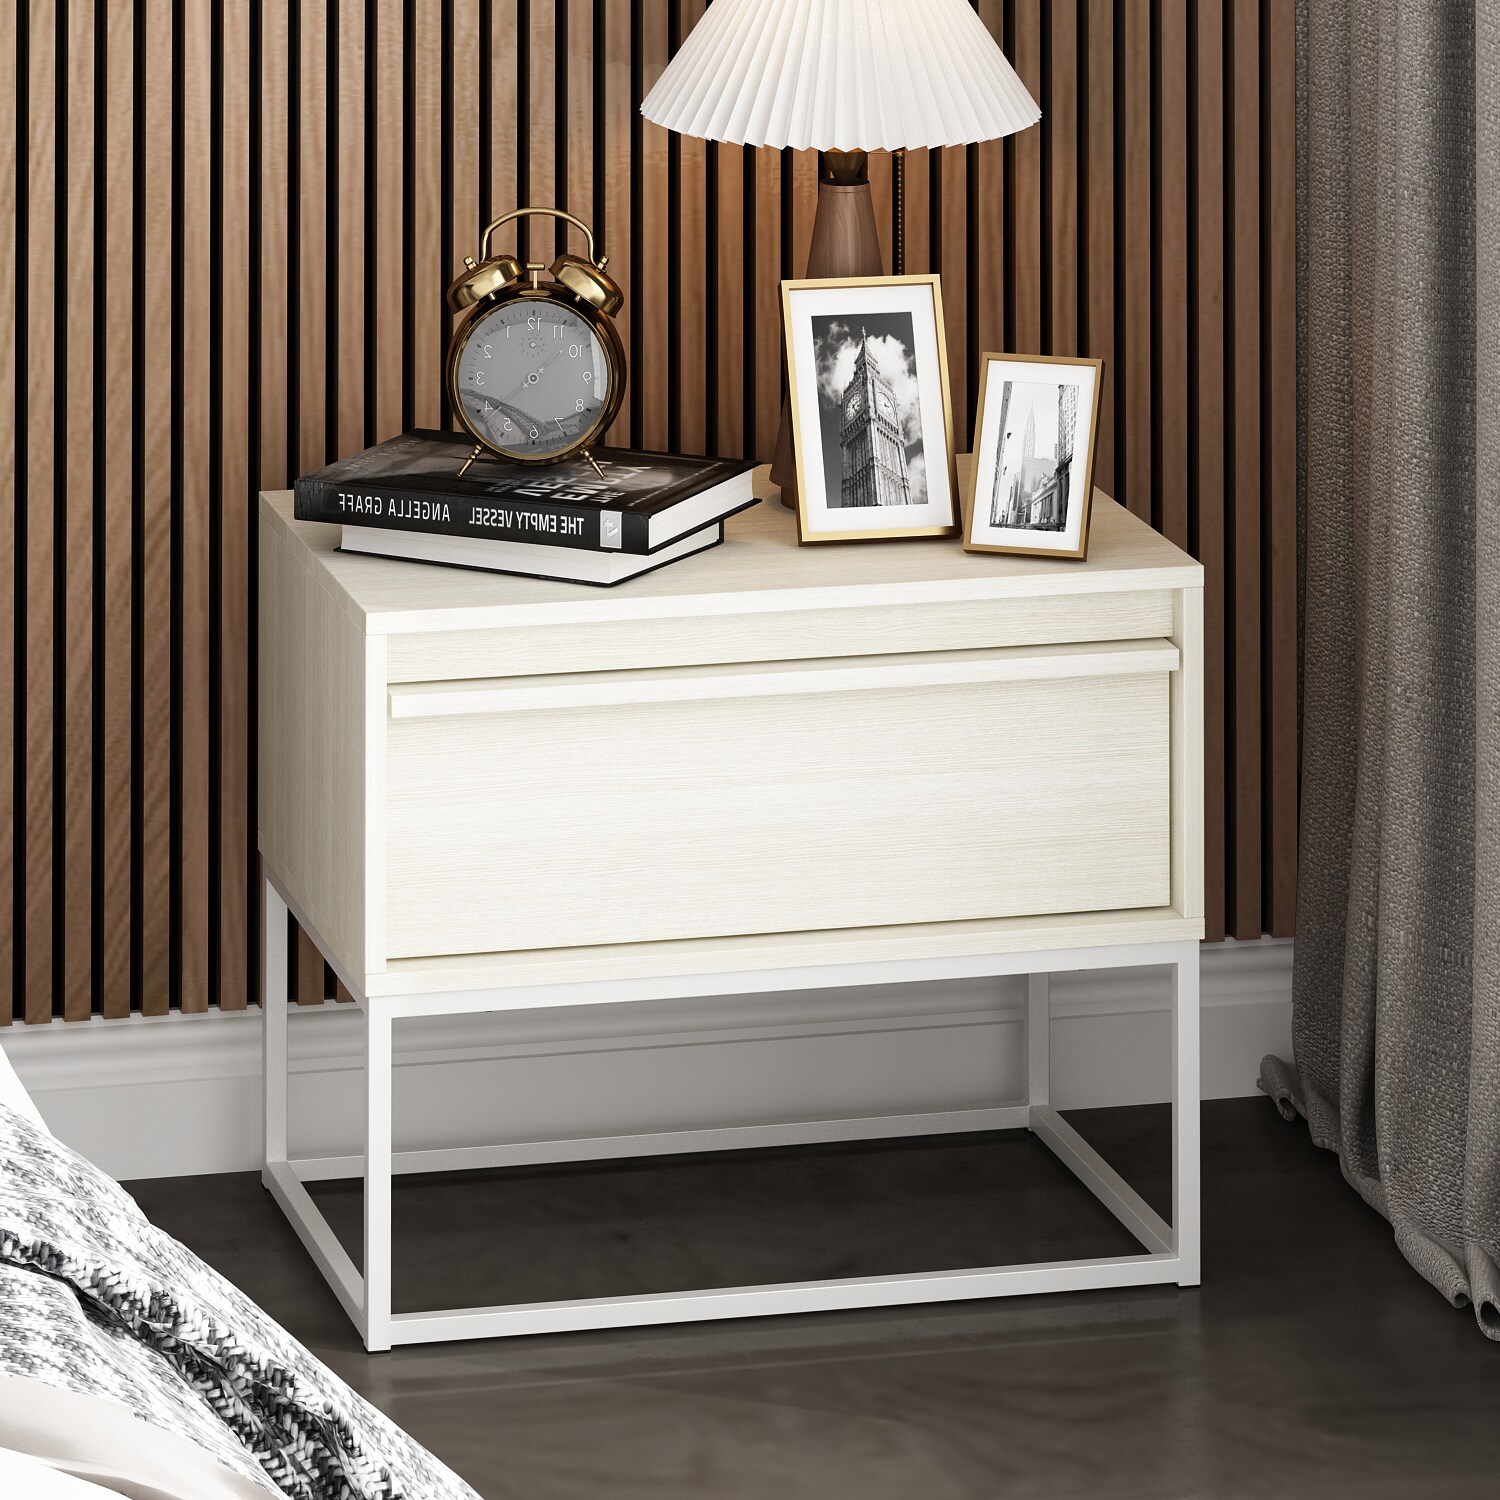 Off-white Nightstands at